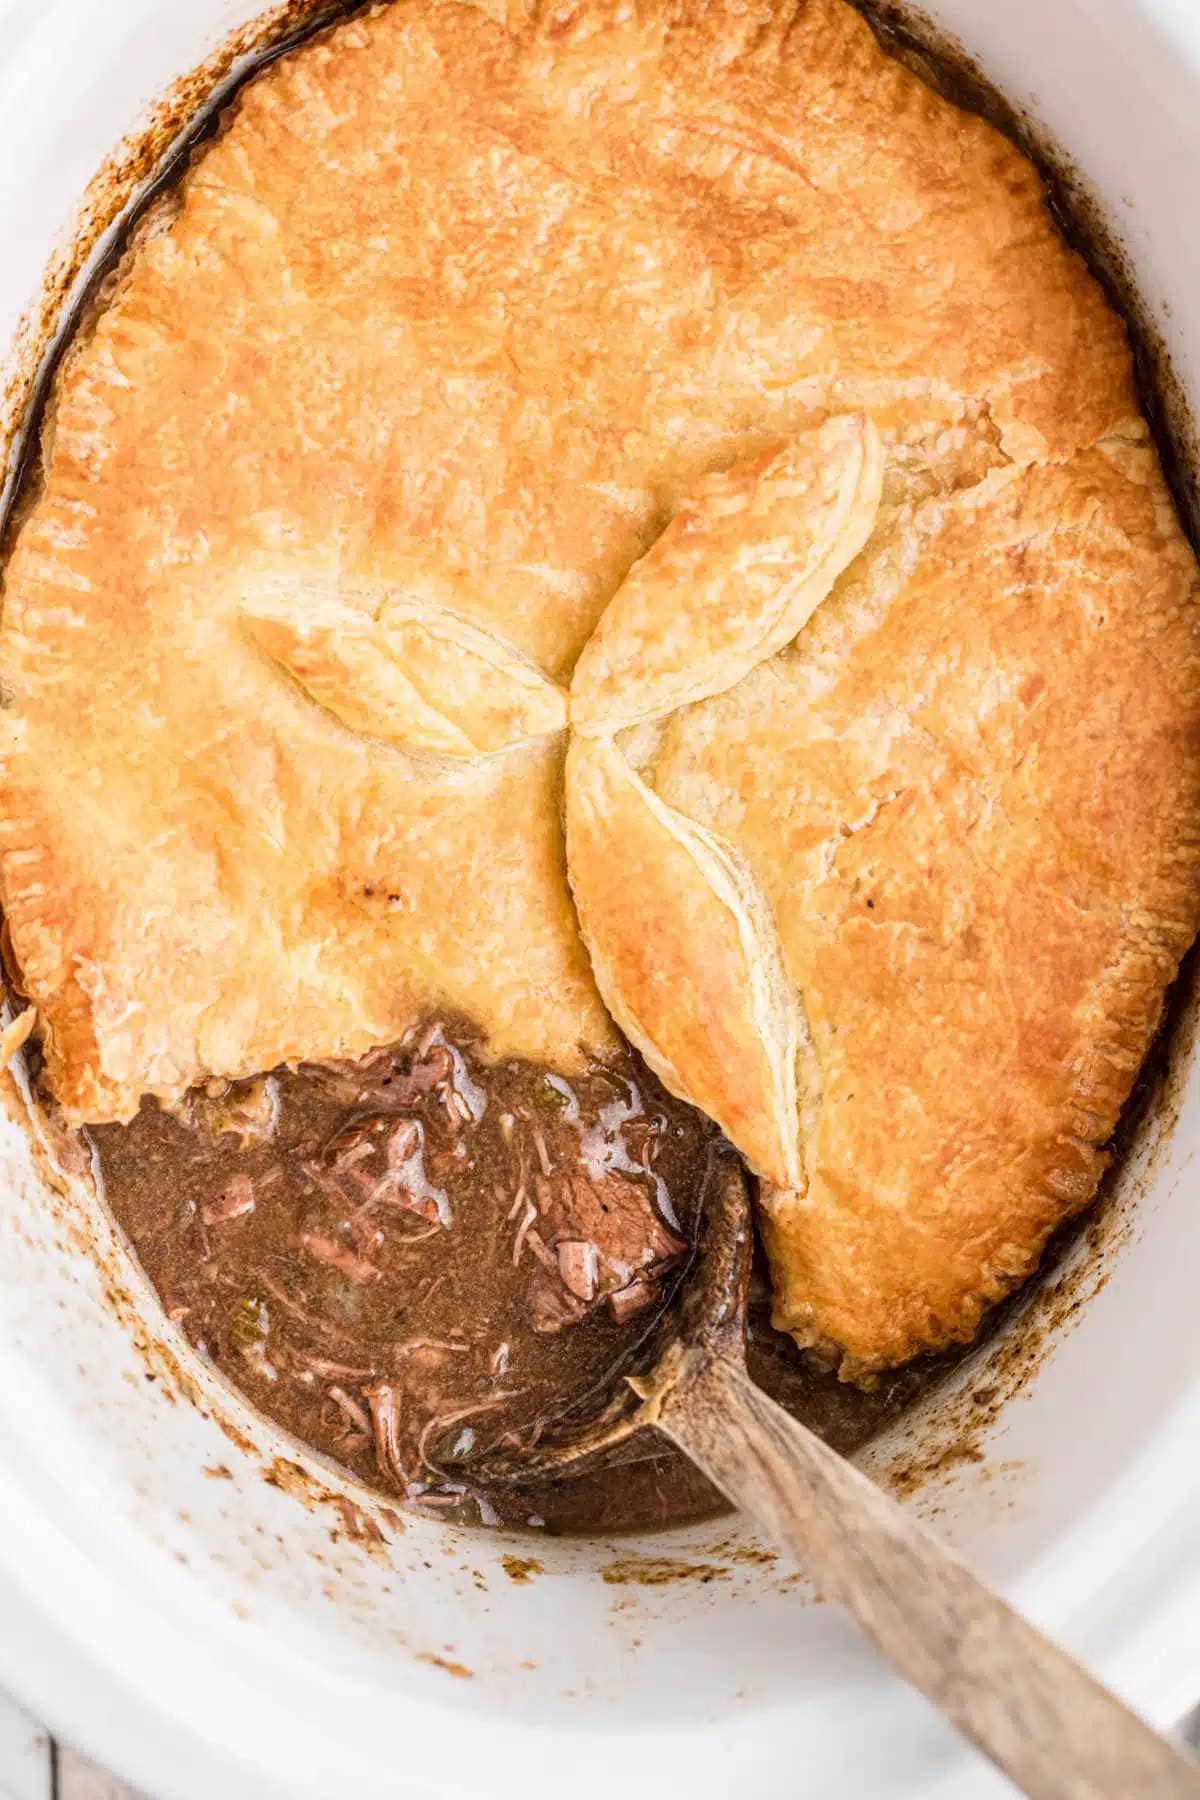 Steak Pie with a beautifully brown crust. There's a spoon dishing up a serving.